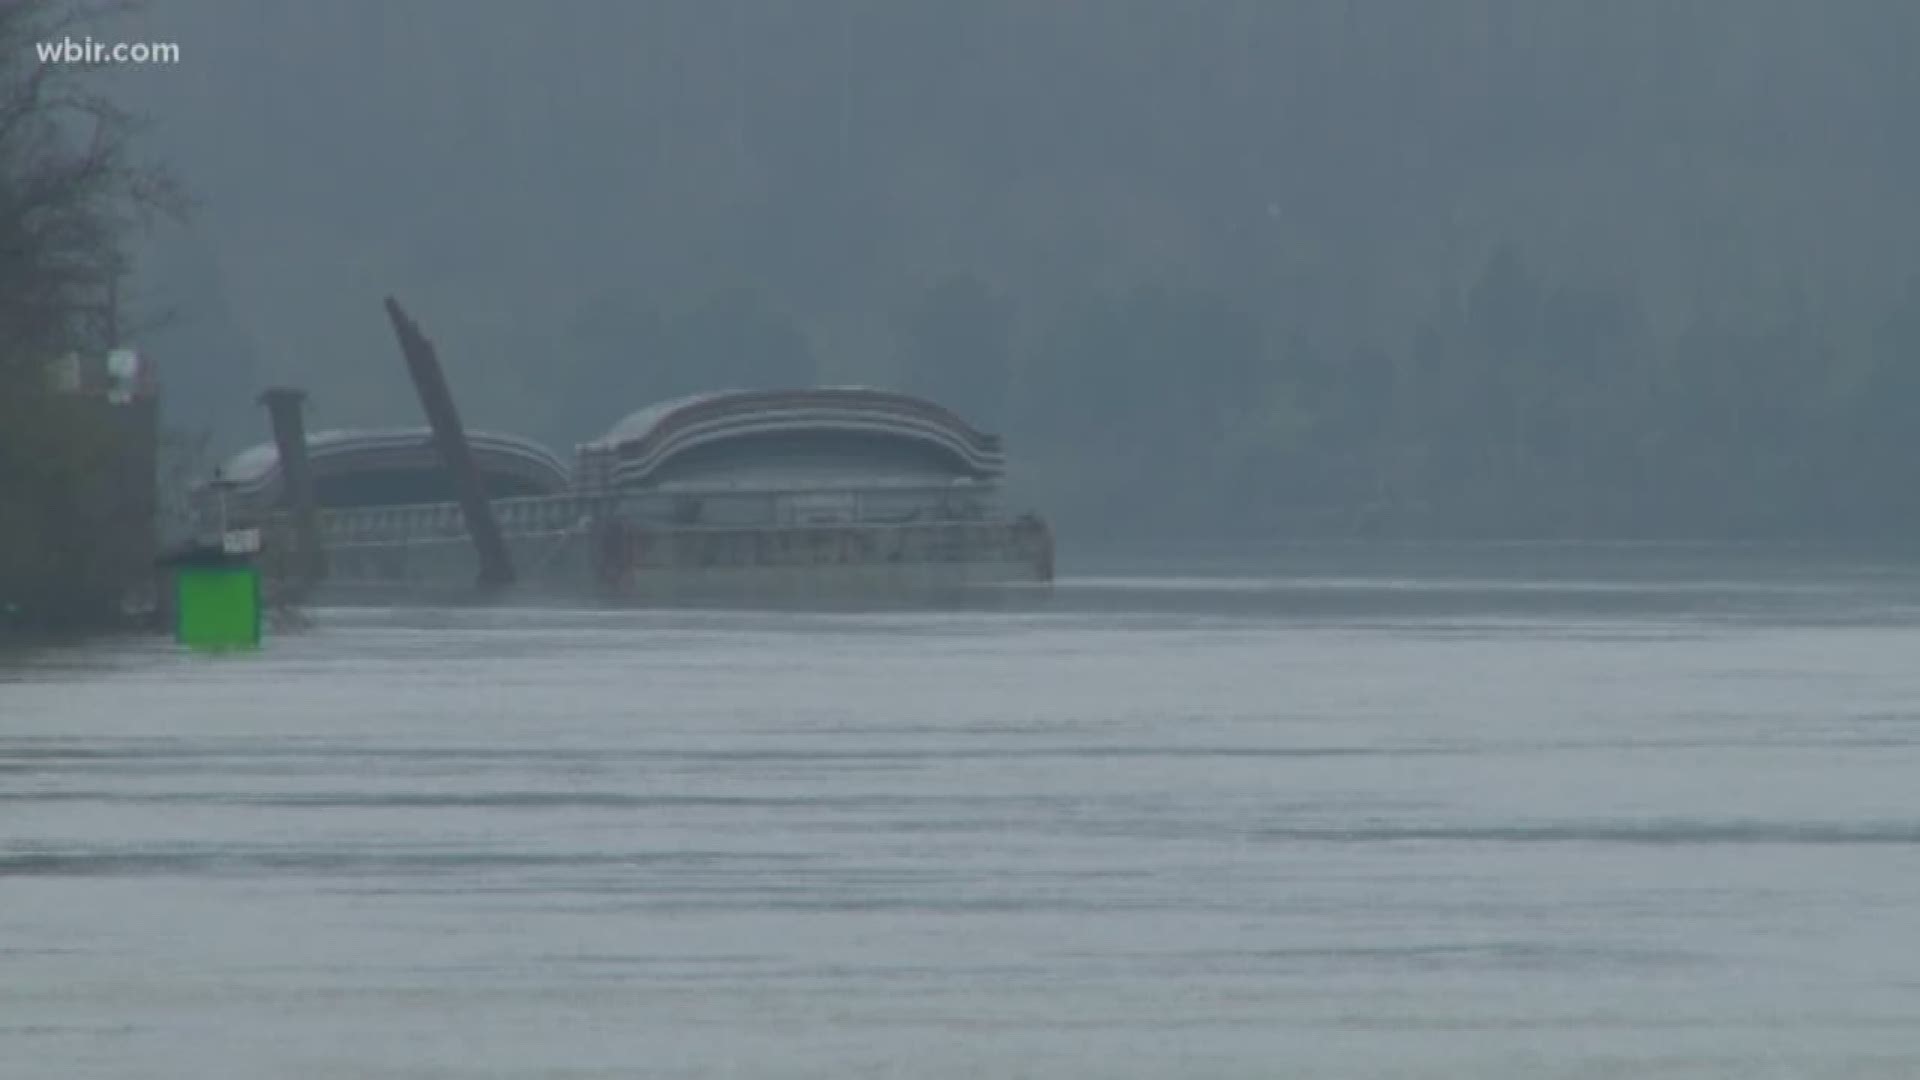 TDOT had to close both sides of I-75 near Loudon at MM 74 after an unmanned barge got loose on the Tennessee River.